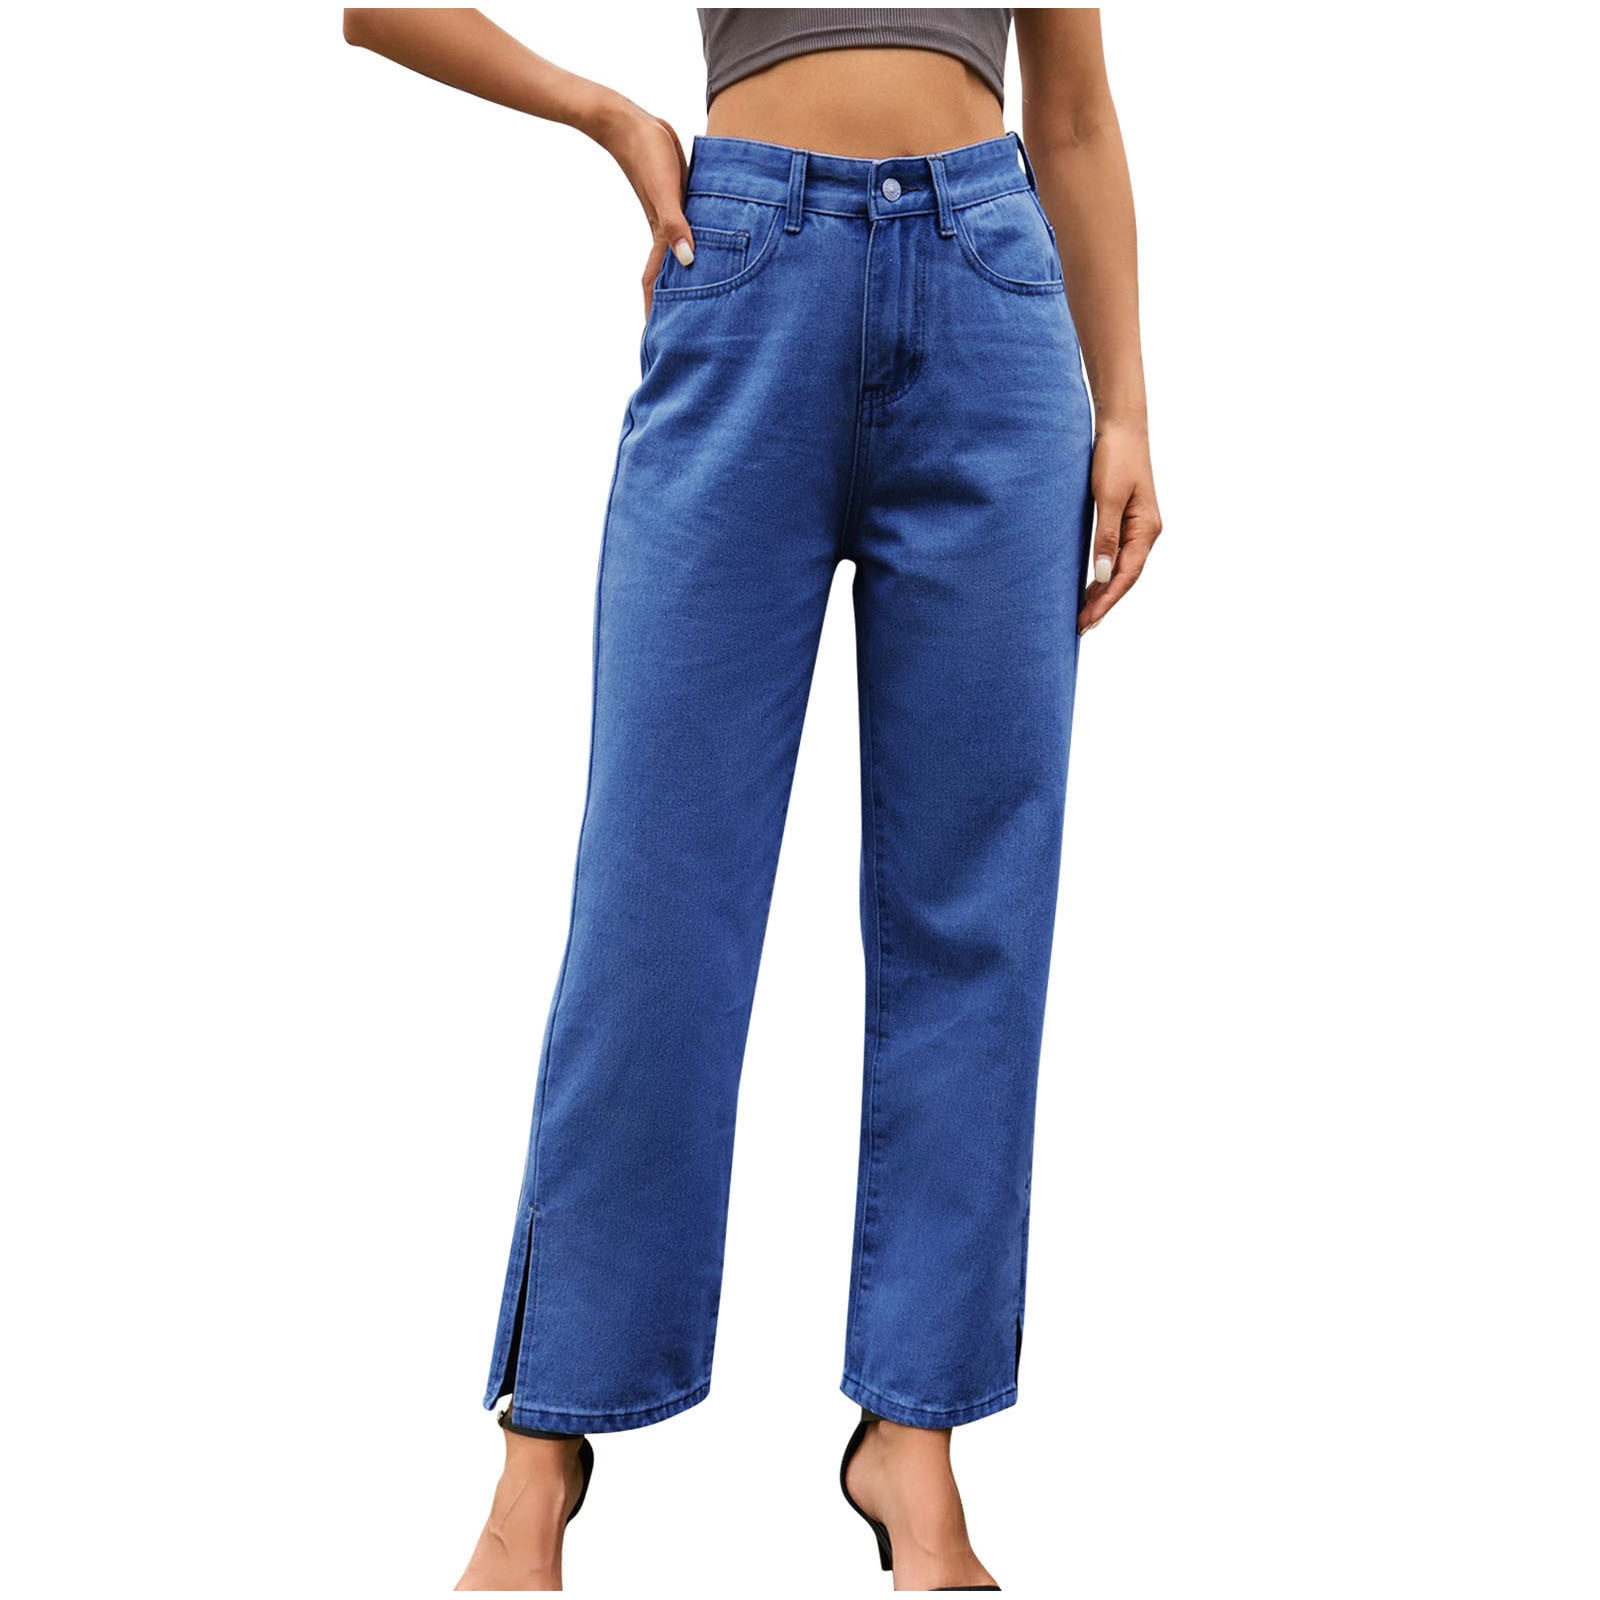 qILAKOG Women's Casual Boyfriend Jeans High Rise Denim Pants with Pocket  Spring And Summer New Women's Button Split Solid Fashion Casual Jeans Pants  Light Blue S